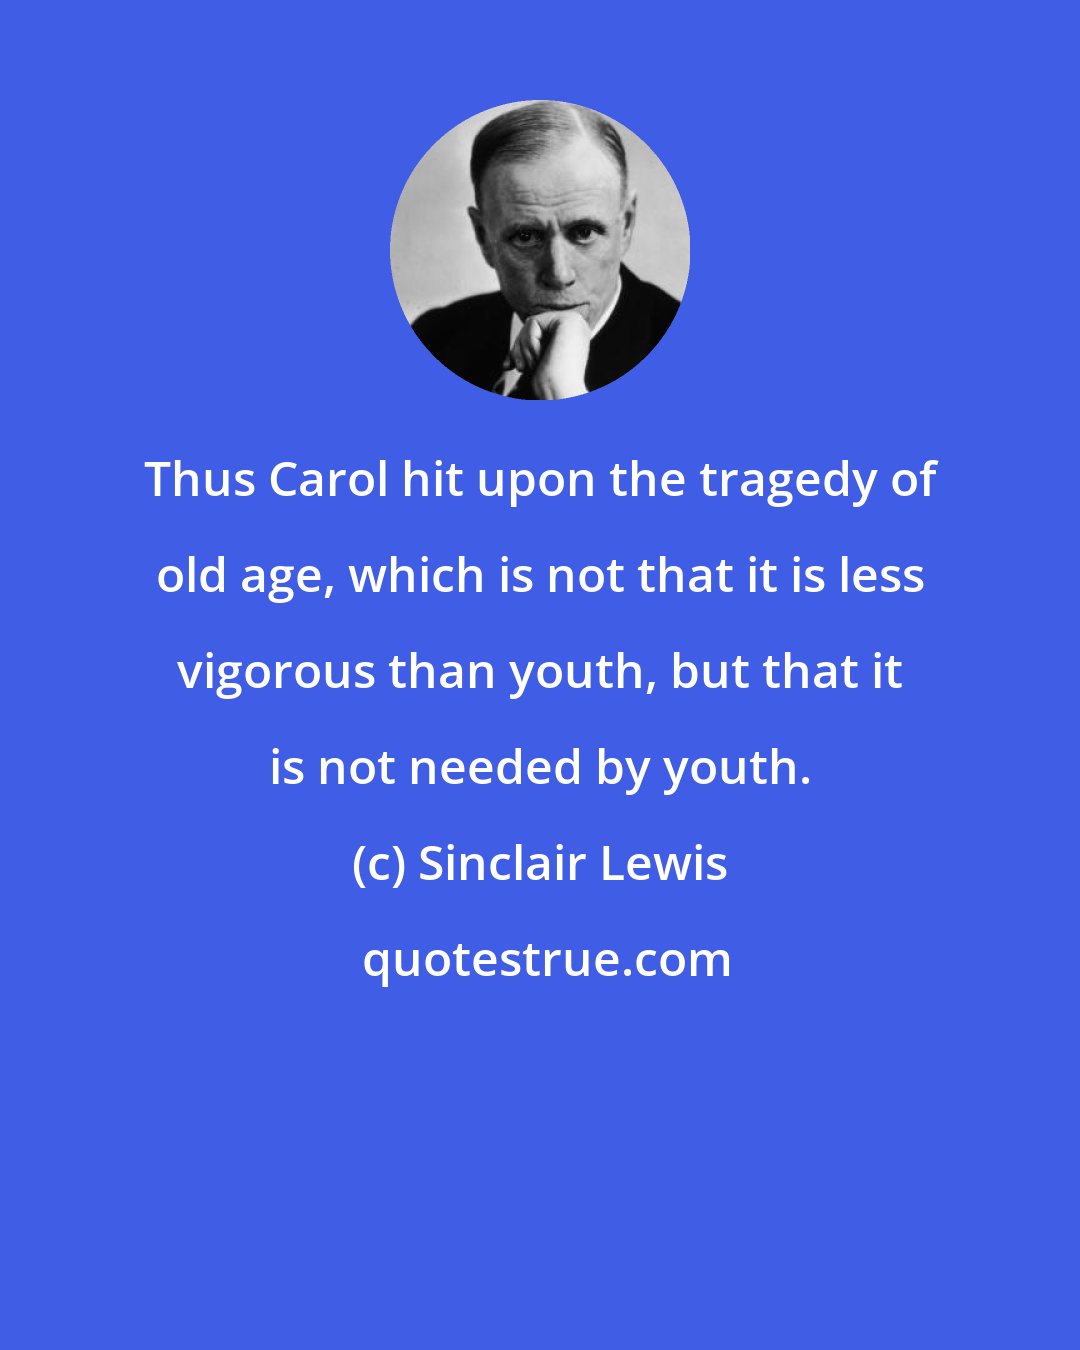 Sinclair Lewis: Thus Carol hit upon the tragedy of old age, which is not that it is less vigorous than youth, but that it is not needed by youth.